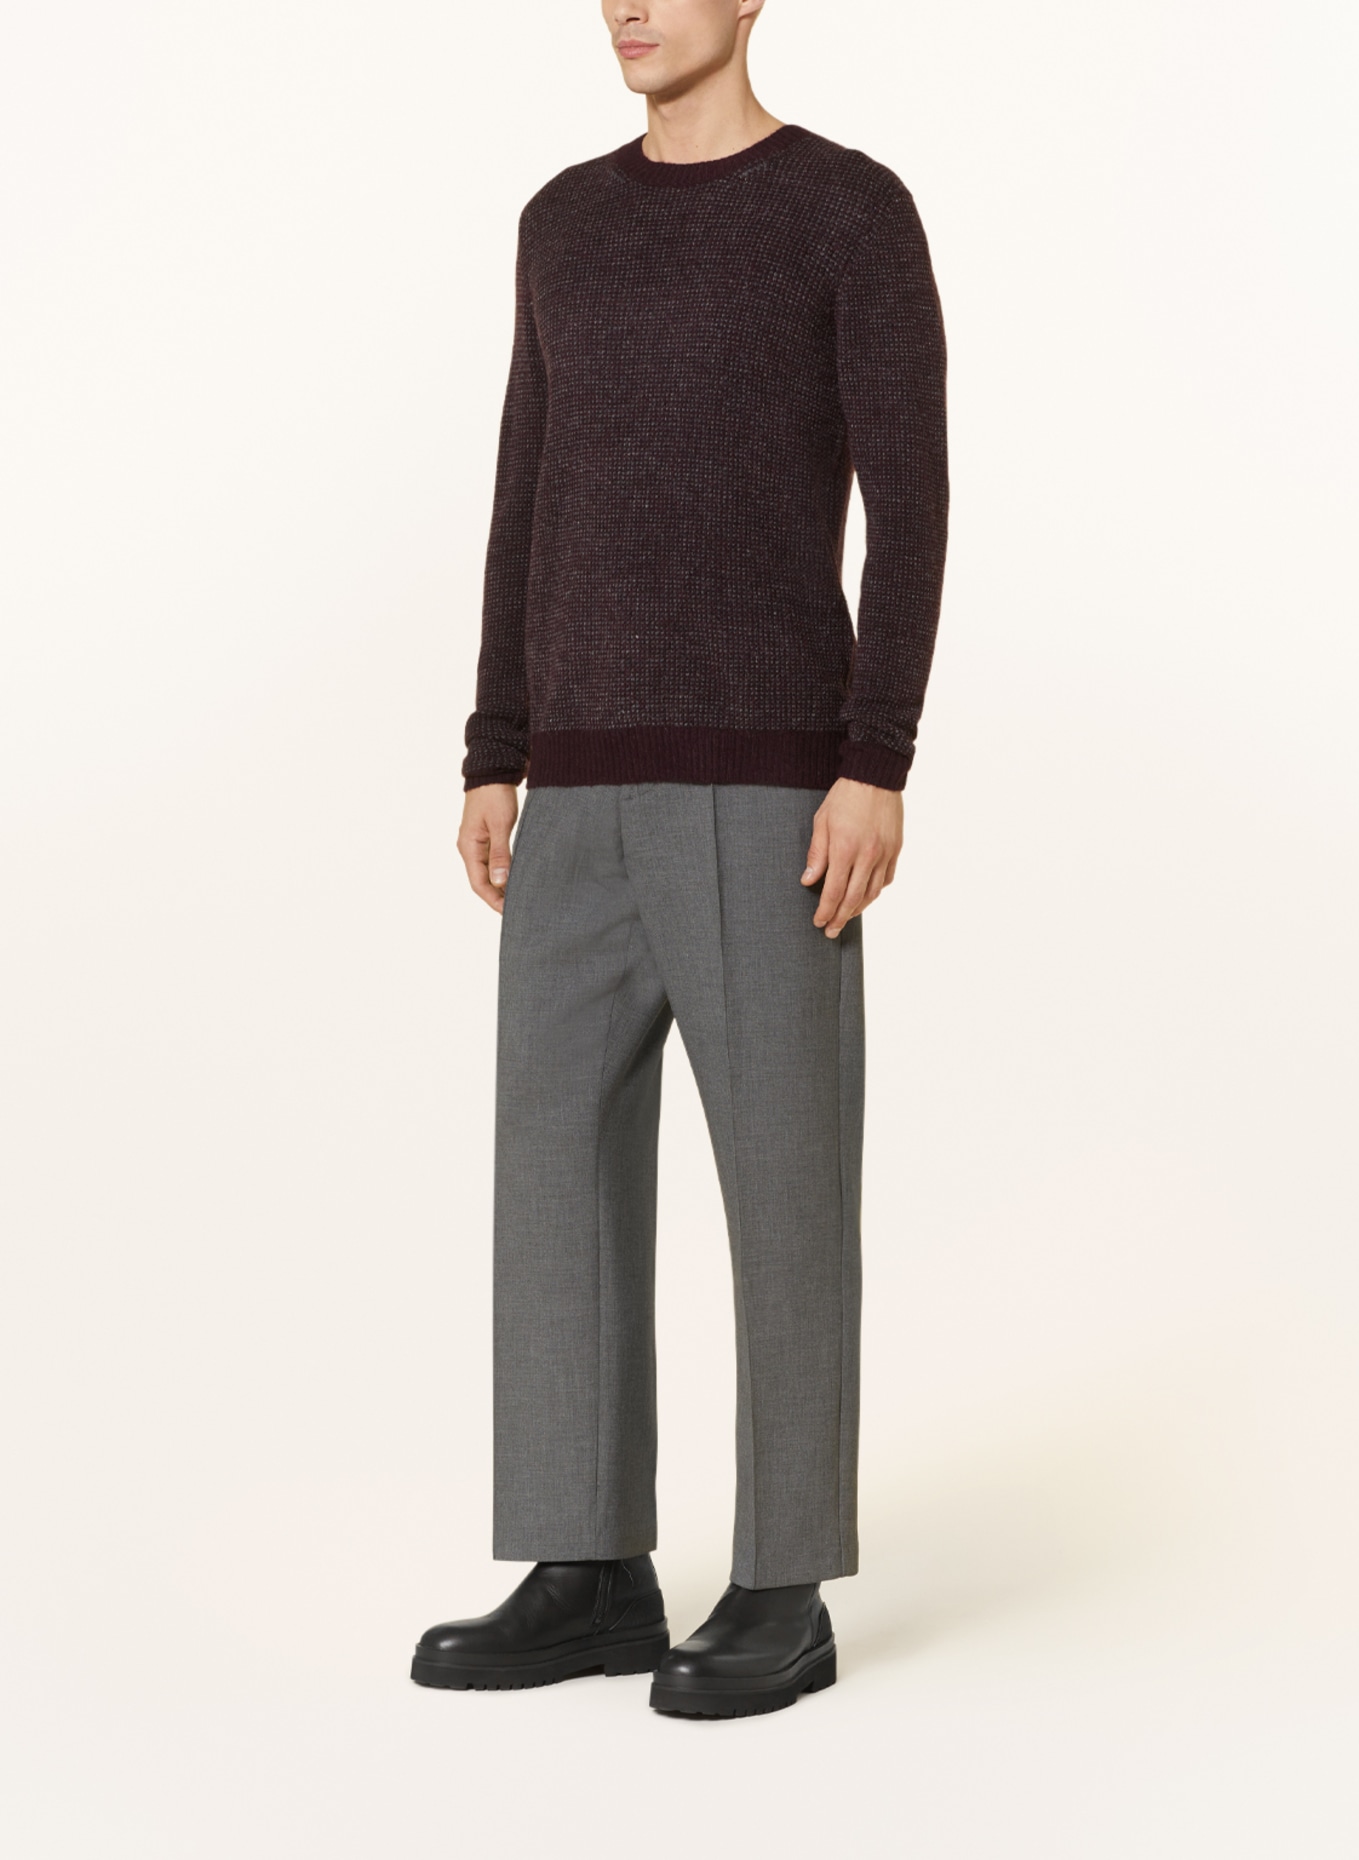 NOWADAYS Sweater, Color: DARK RED/ GRAY (Image 3)